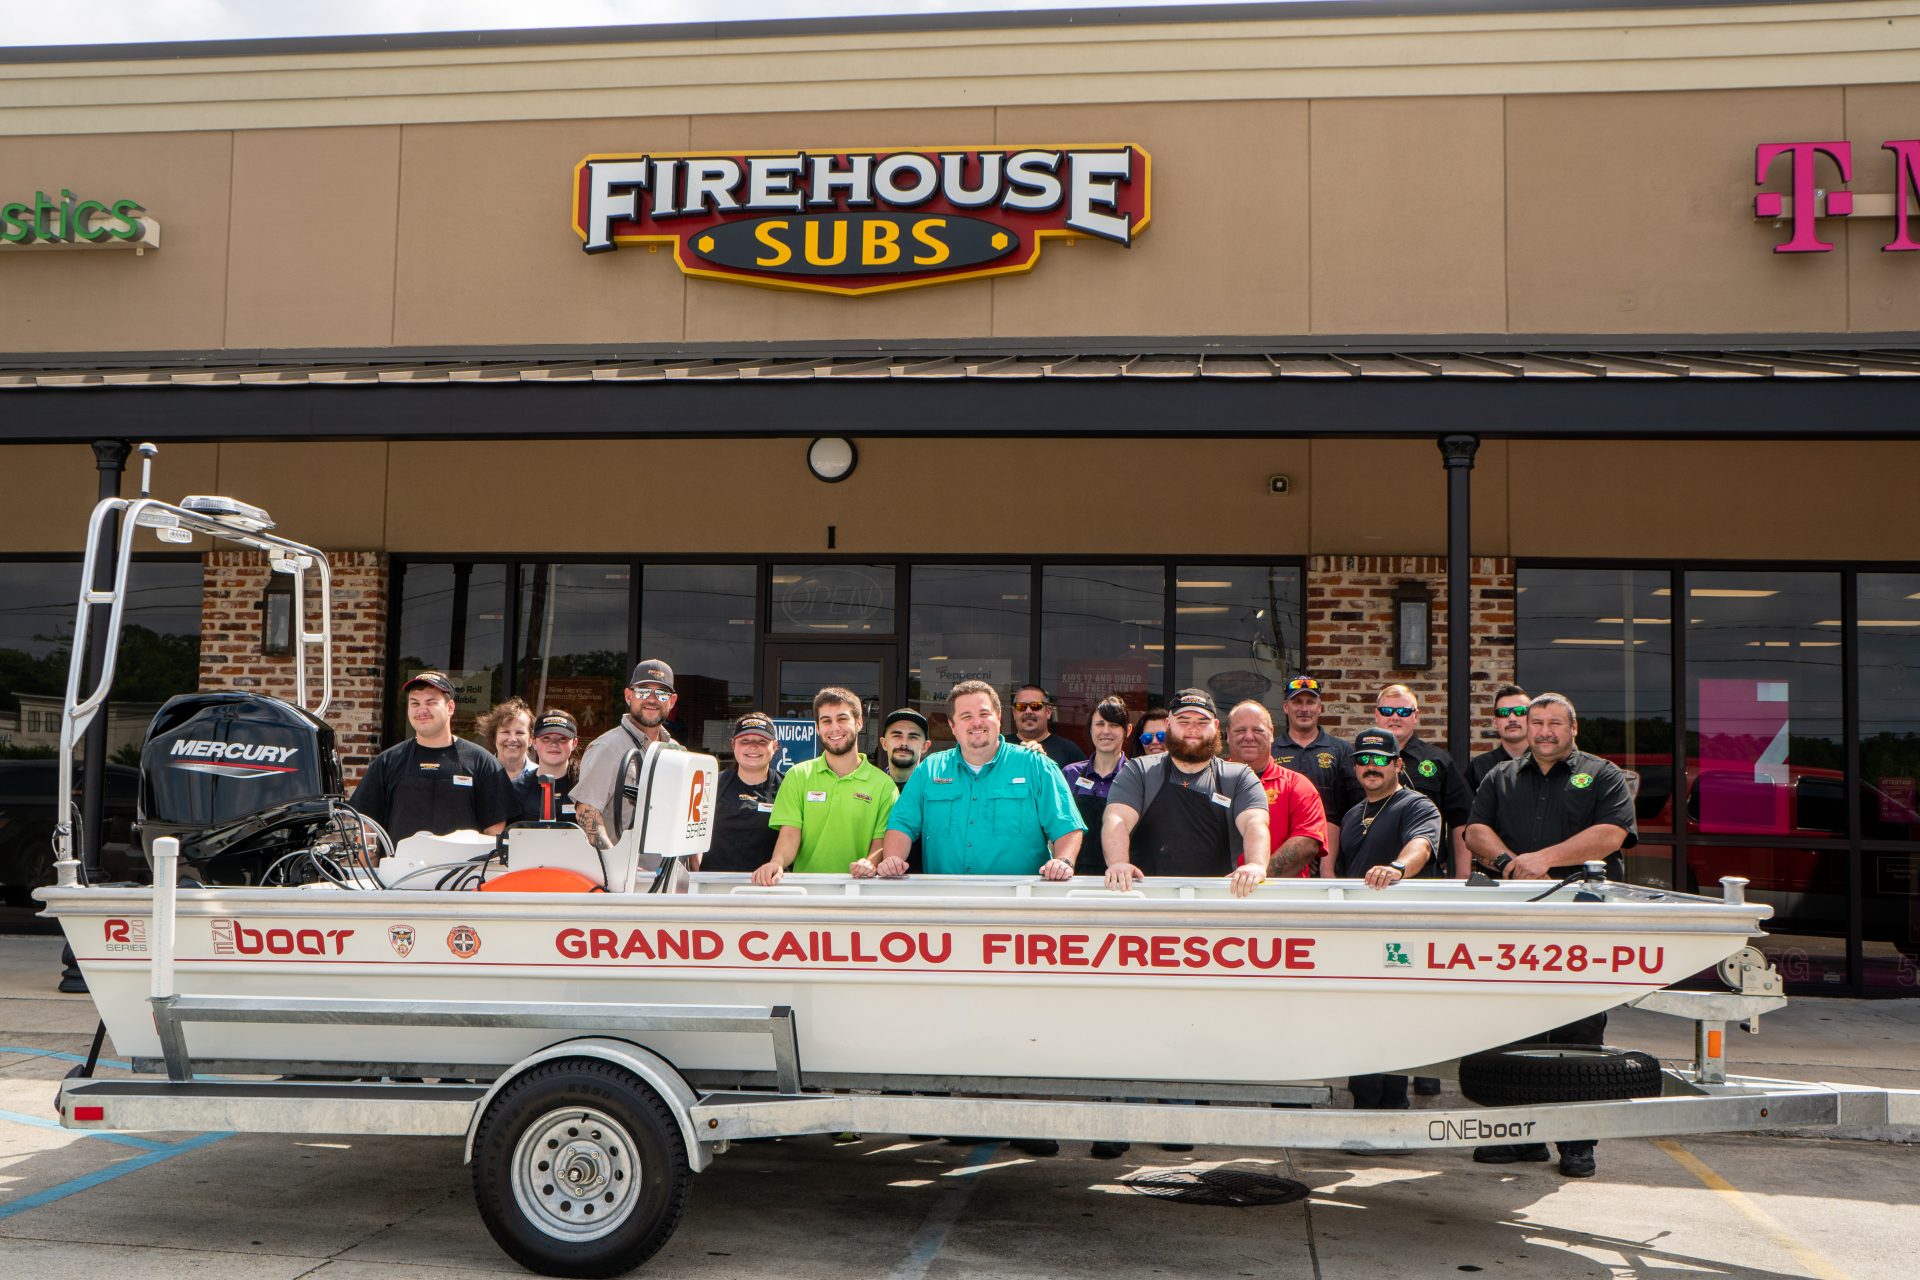 Firehouse subs. Firehouse - category 5. Public Safety. Sub public